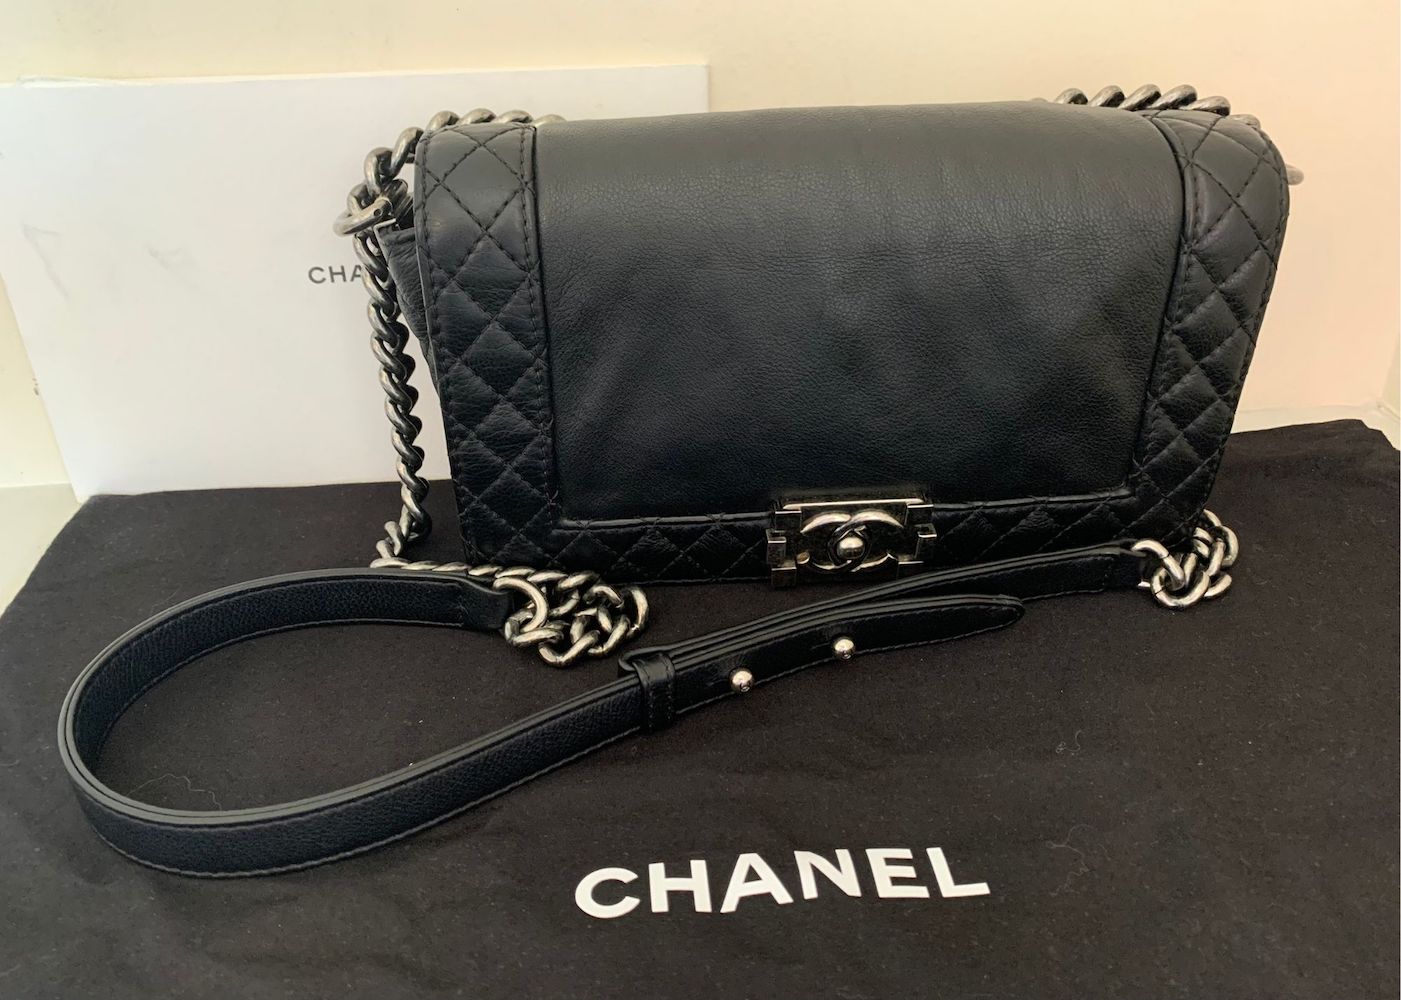 My Top 3 Favorite Chanel Bags  Gallery posted by Elyse Aiyana